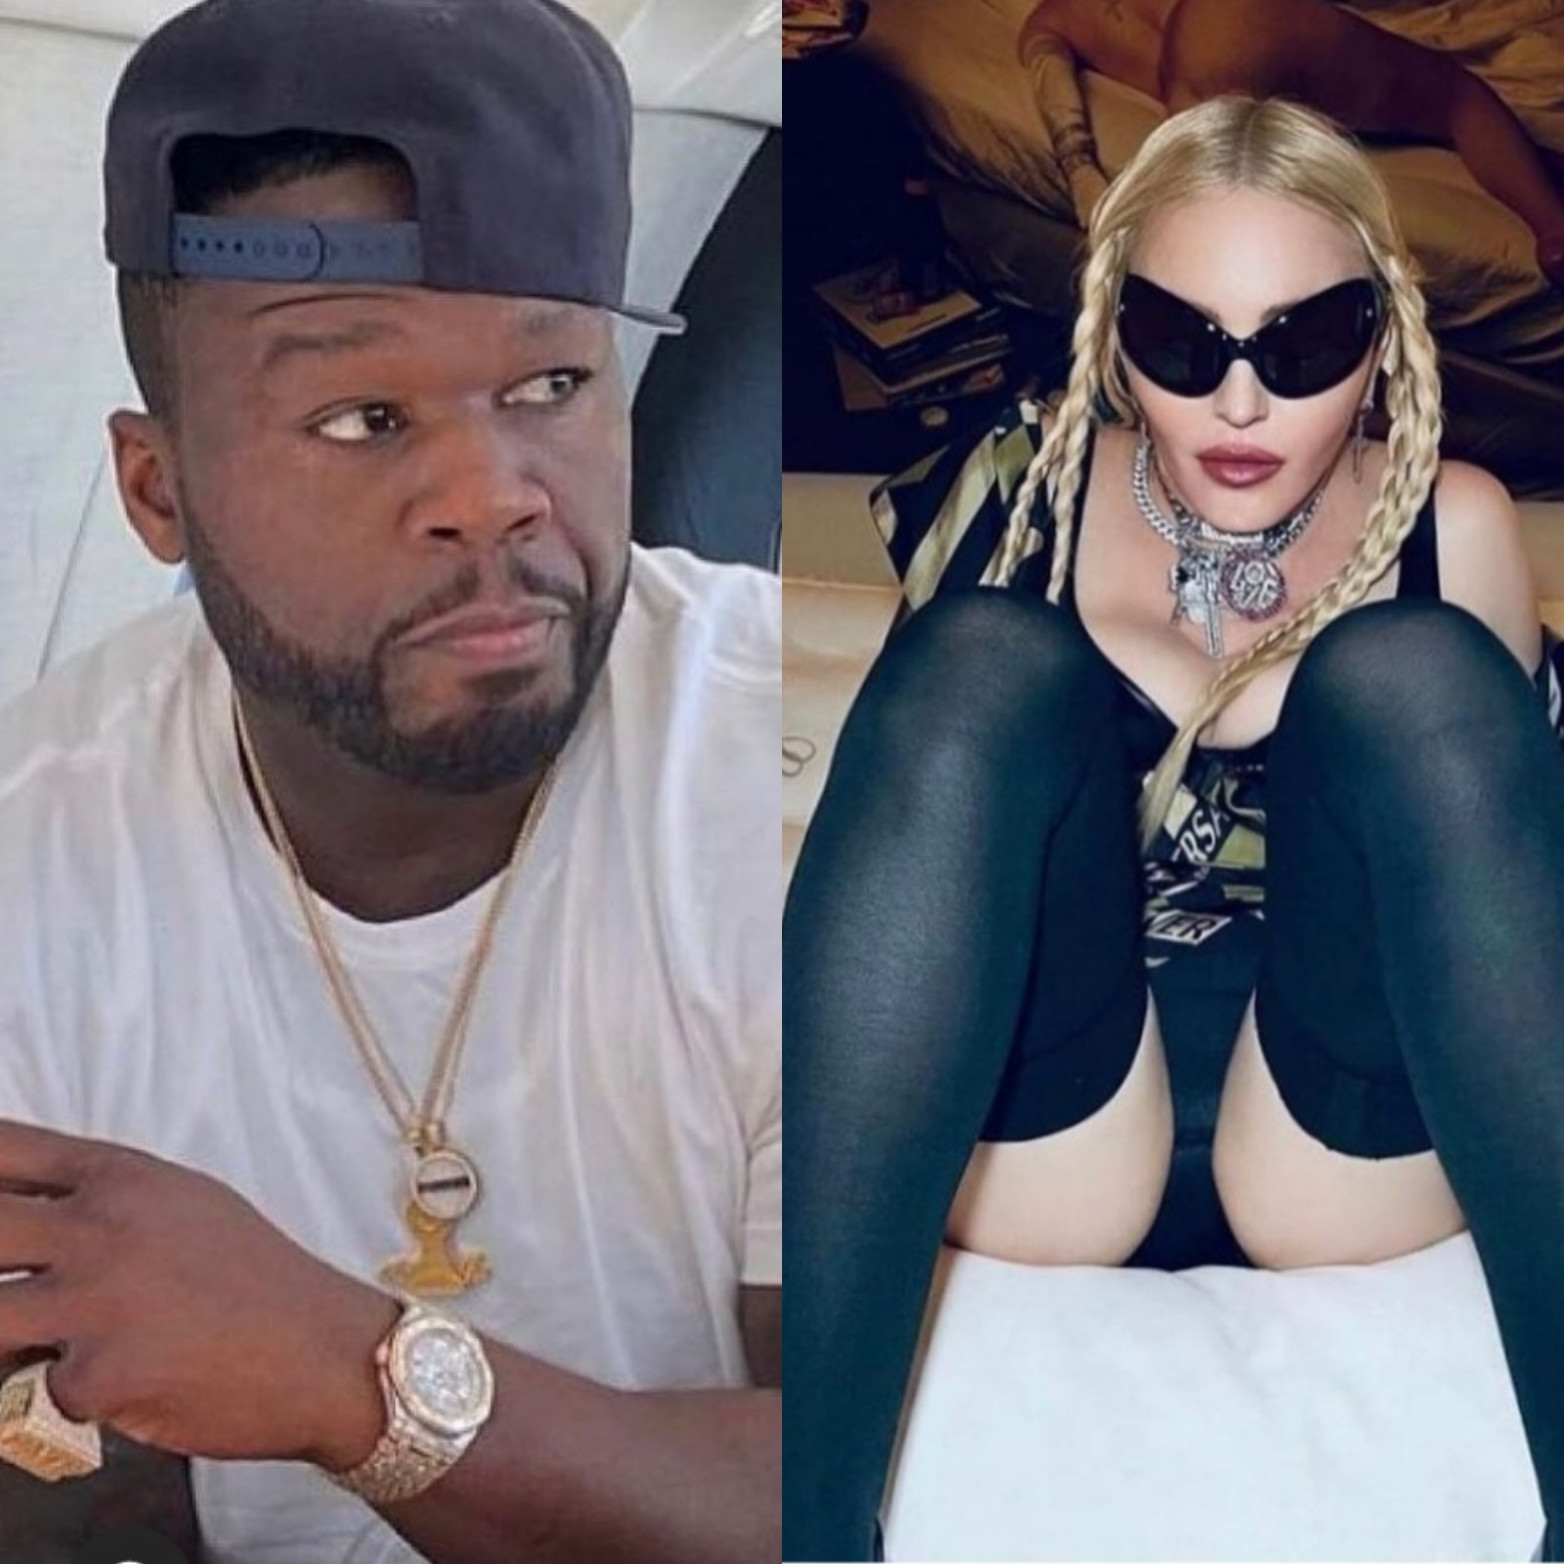 50 Cent mocks Madonna by likening her to an alien over her recent raunchy photo